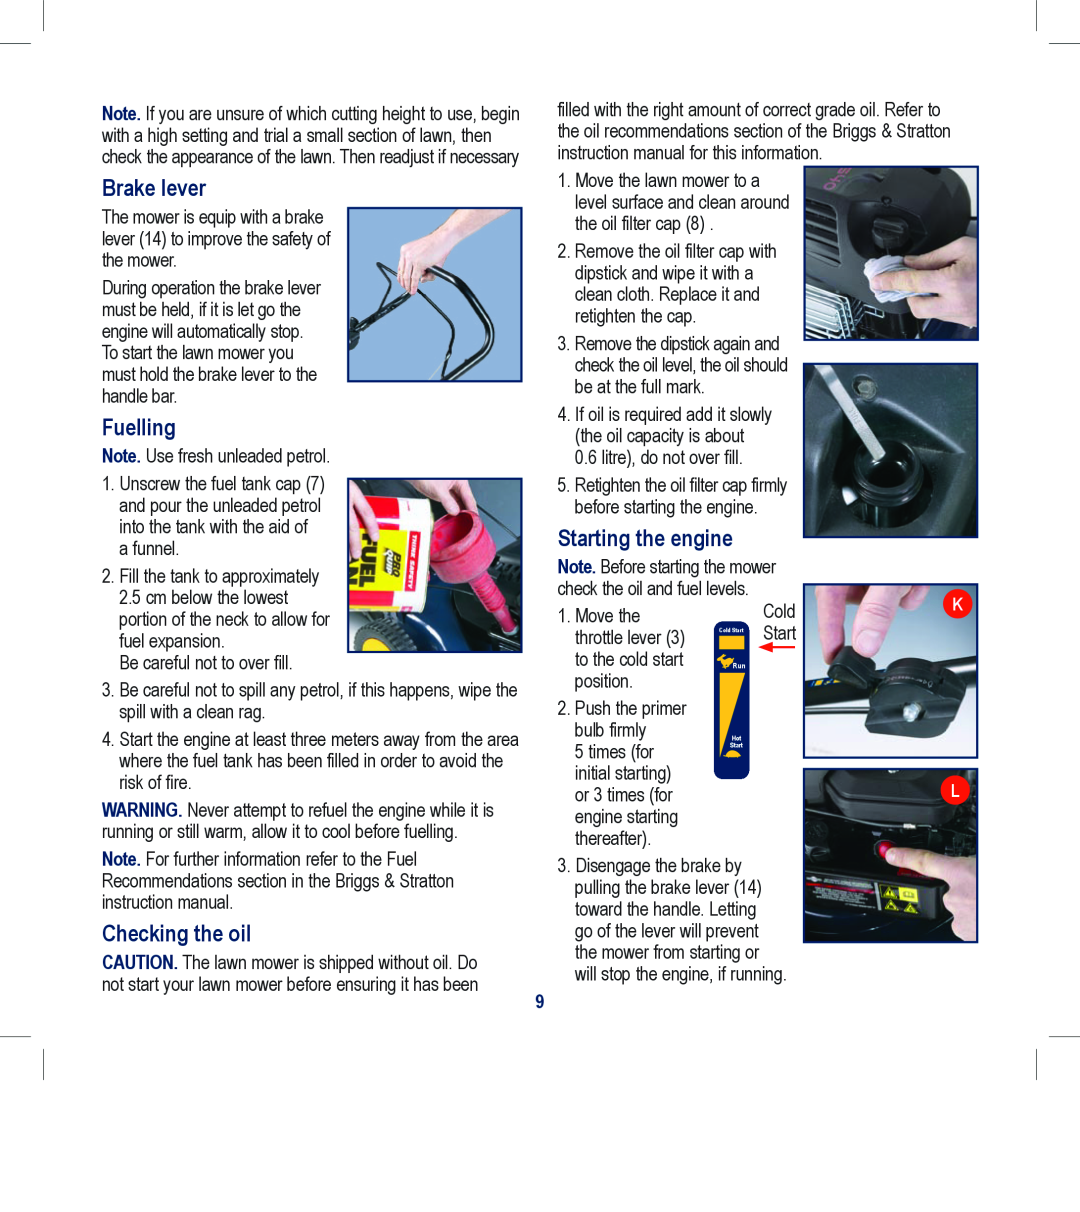 Global Machinery Company RL504 instruction manual Brake lever, Fuelling, Checking the oil, Starting the engine 